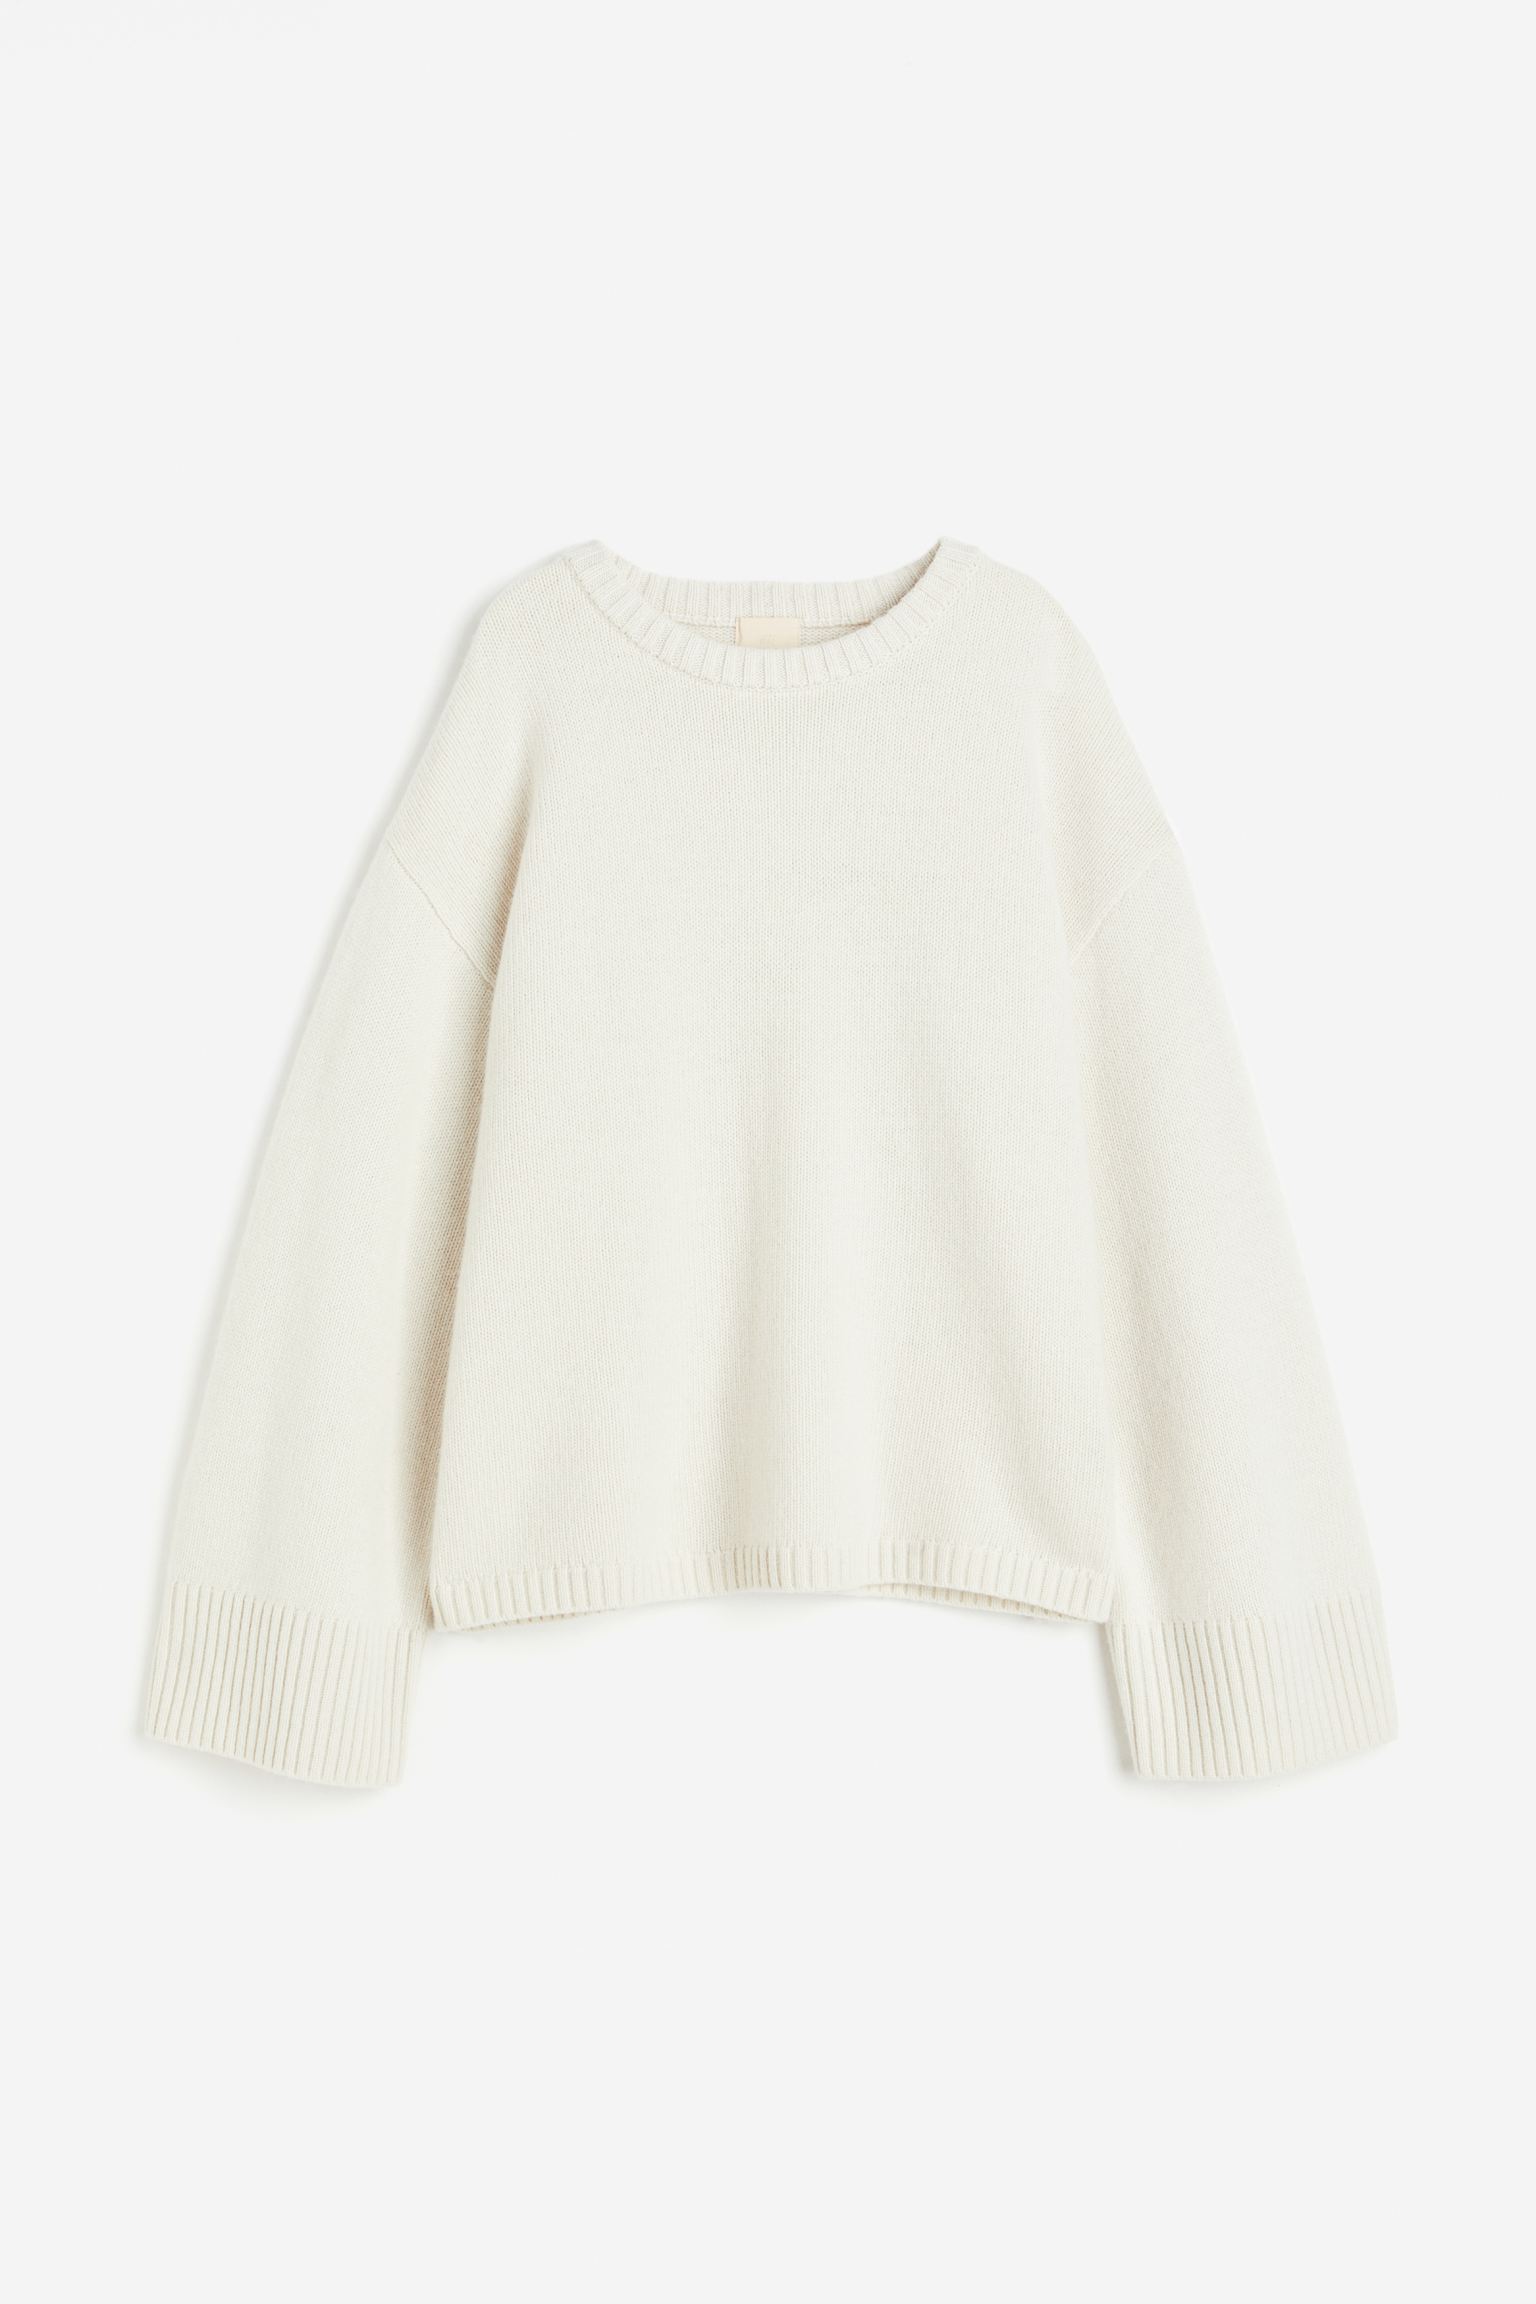 This H&M Premium Collection Knit Is Bound to Sell Out | Who What Wear UK